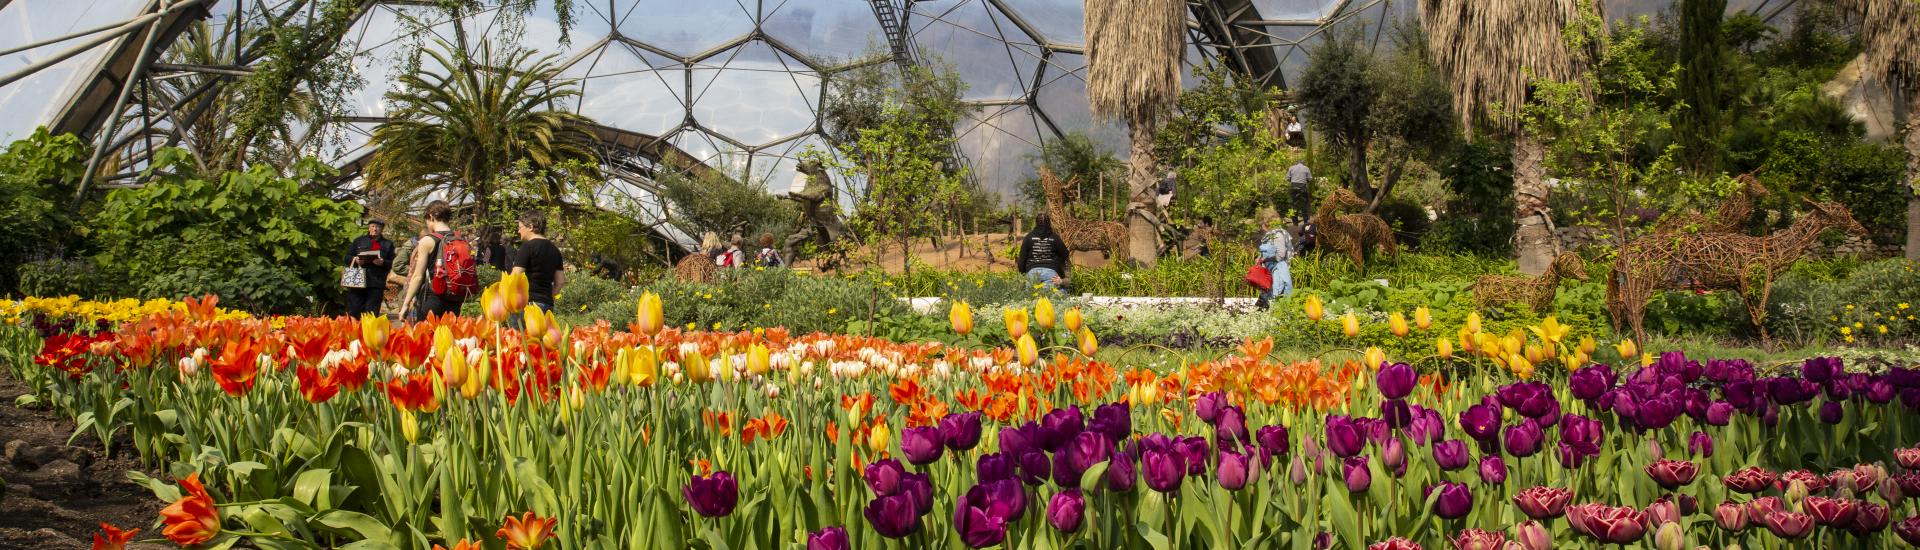 Tulips growing in Mediterranean Biome at Eden Project